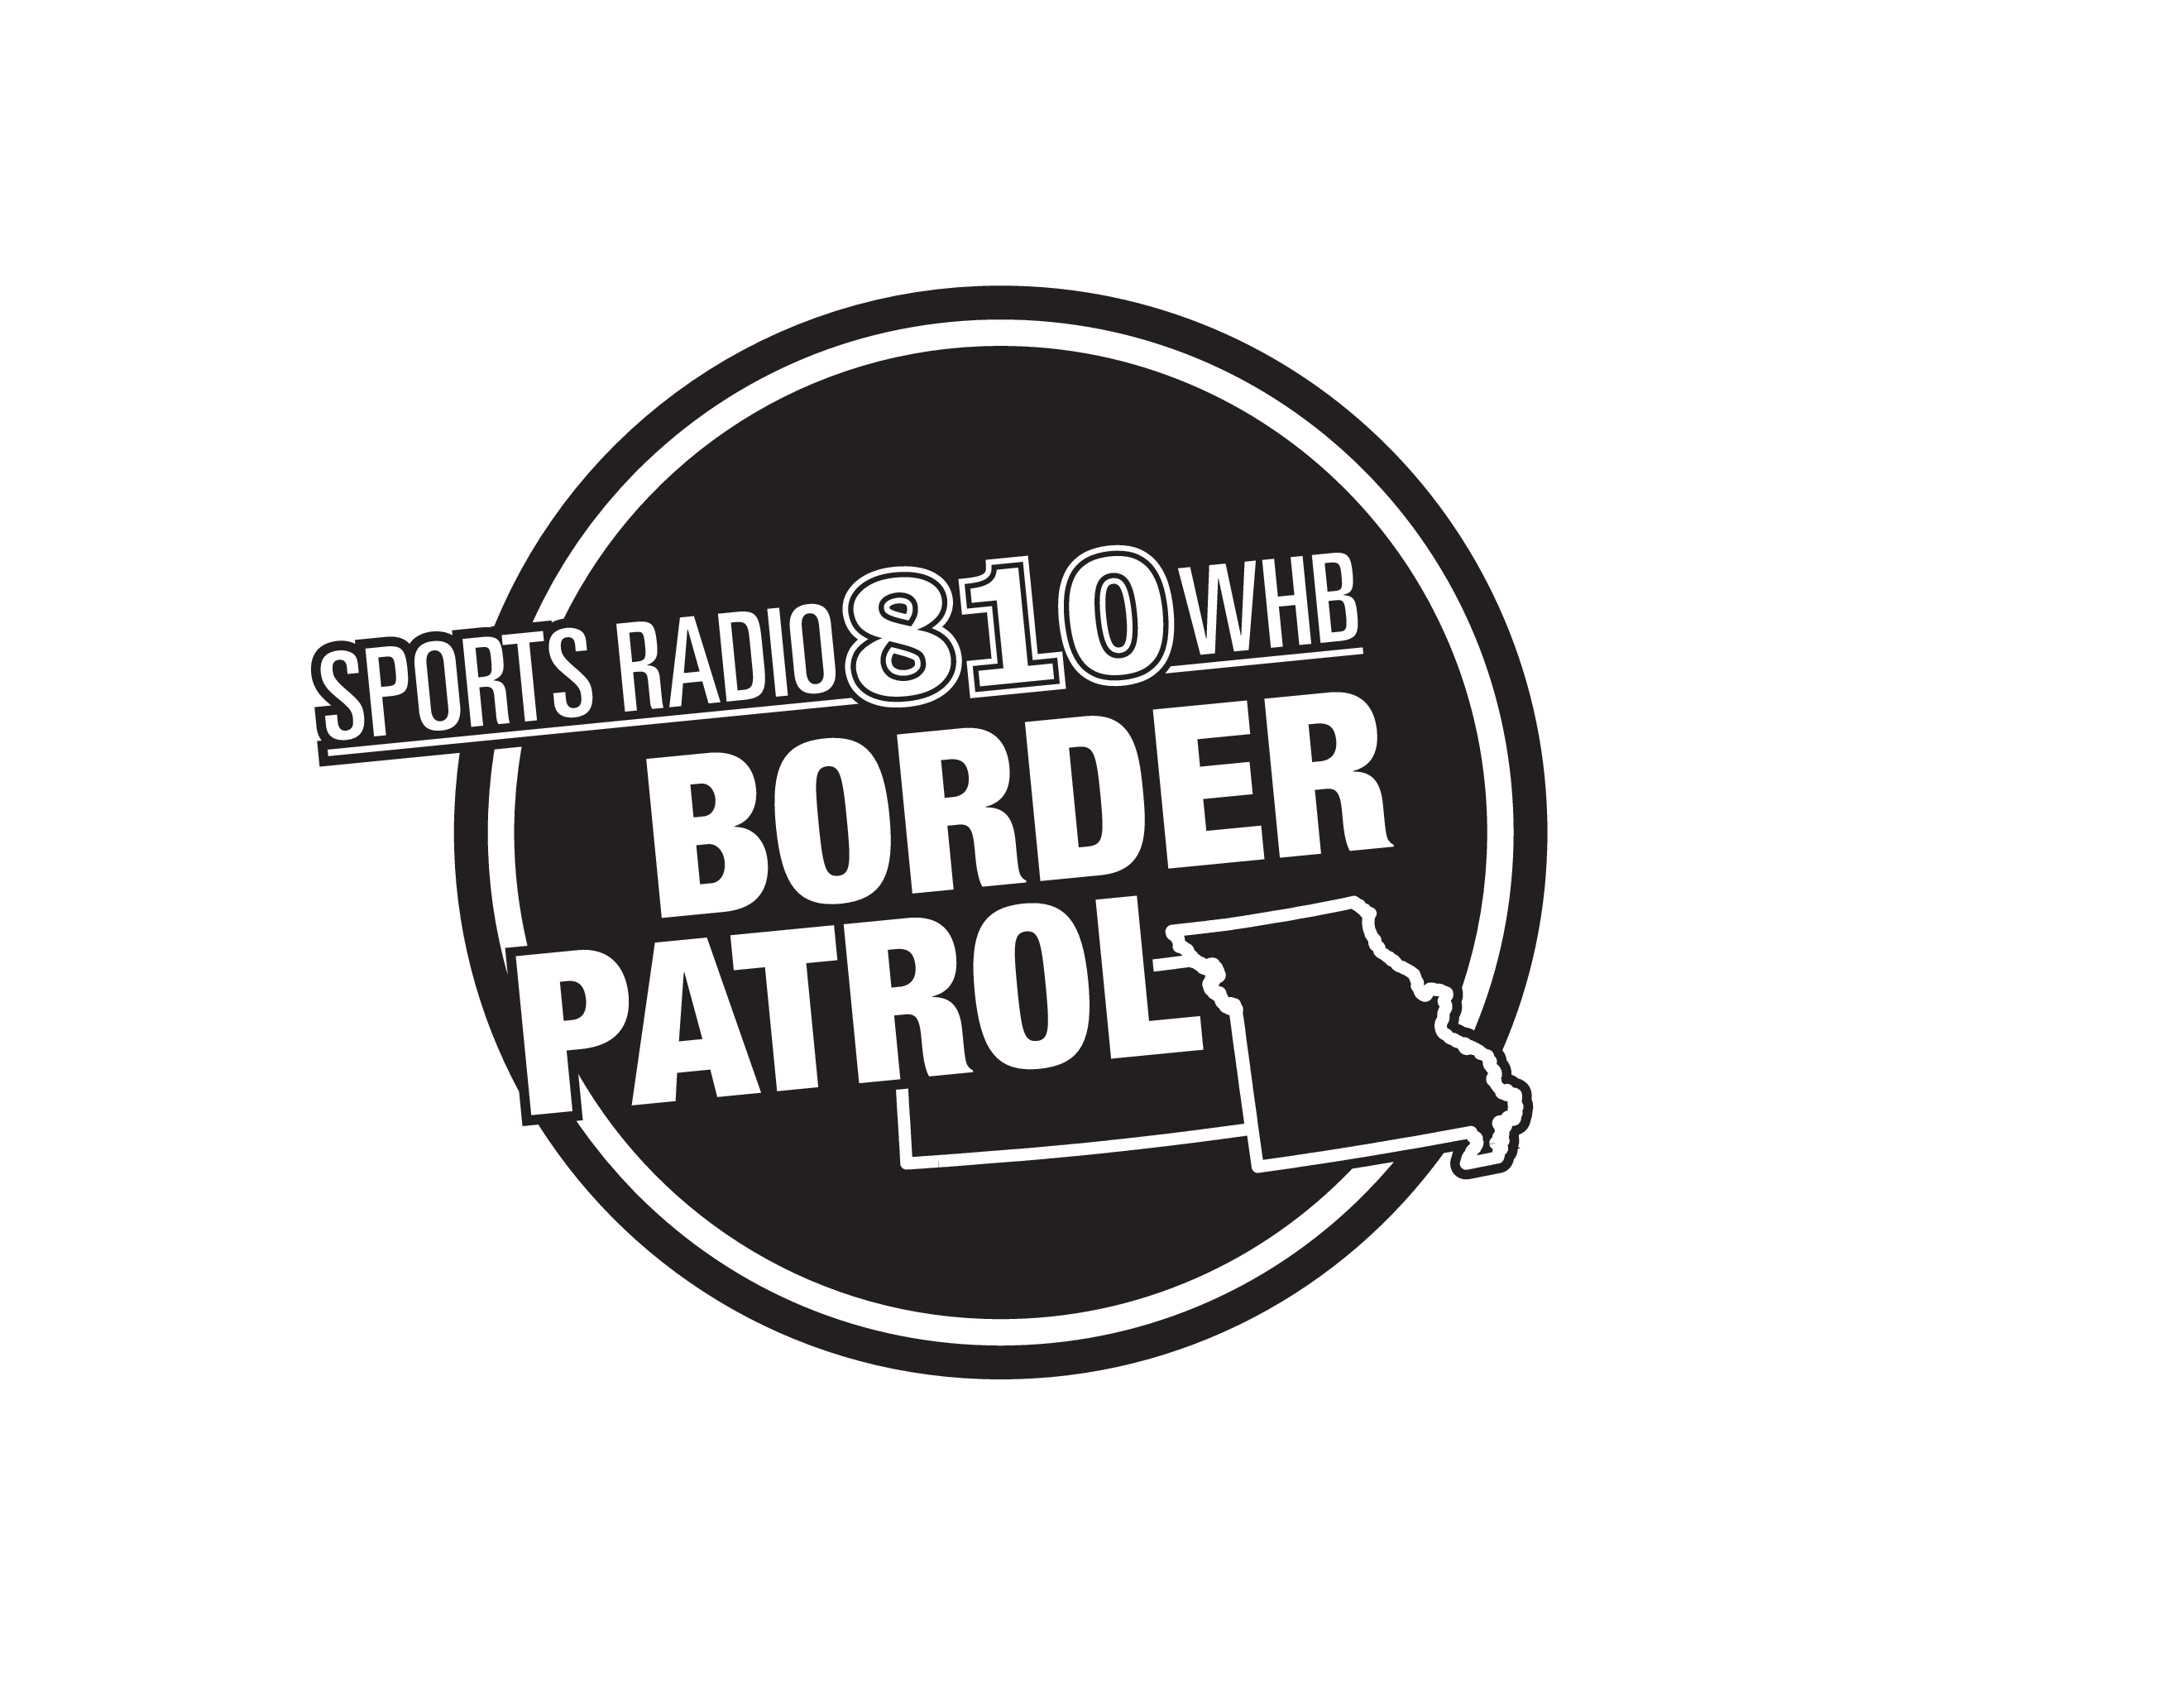 6-30-22 HR 1 of The Border Patrol on 38 The Spot